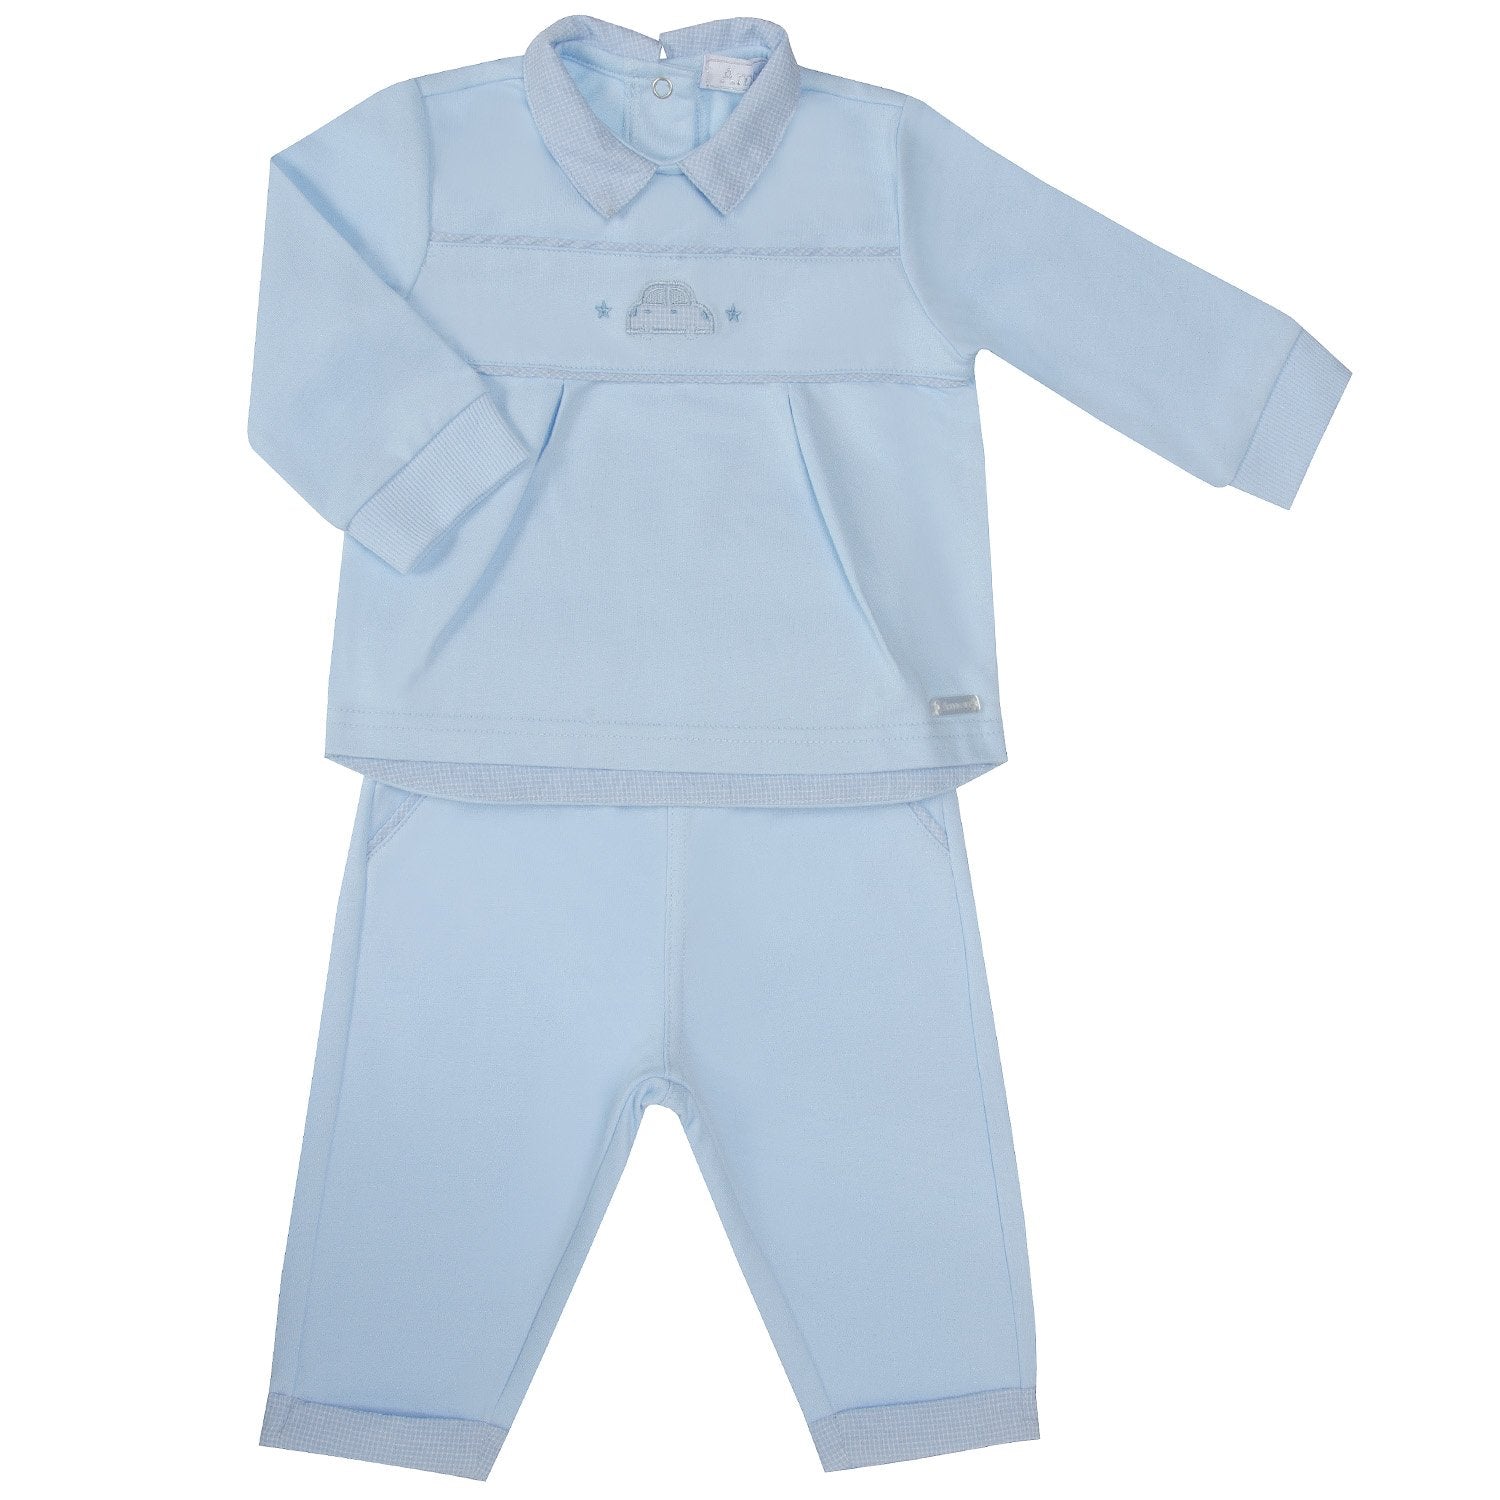 This Amore two-piece set for boys is perfect for all occasions. The long-sleeve top and elasticated waistband trousers come in shades of blue with fun car embroidery going through the middle. Available from size 0 to 3 months up to 18 to 24 months.